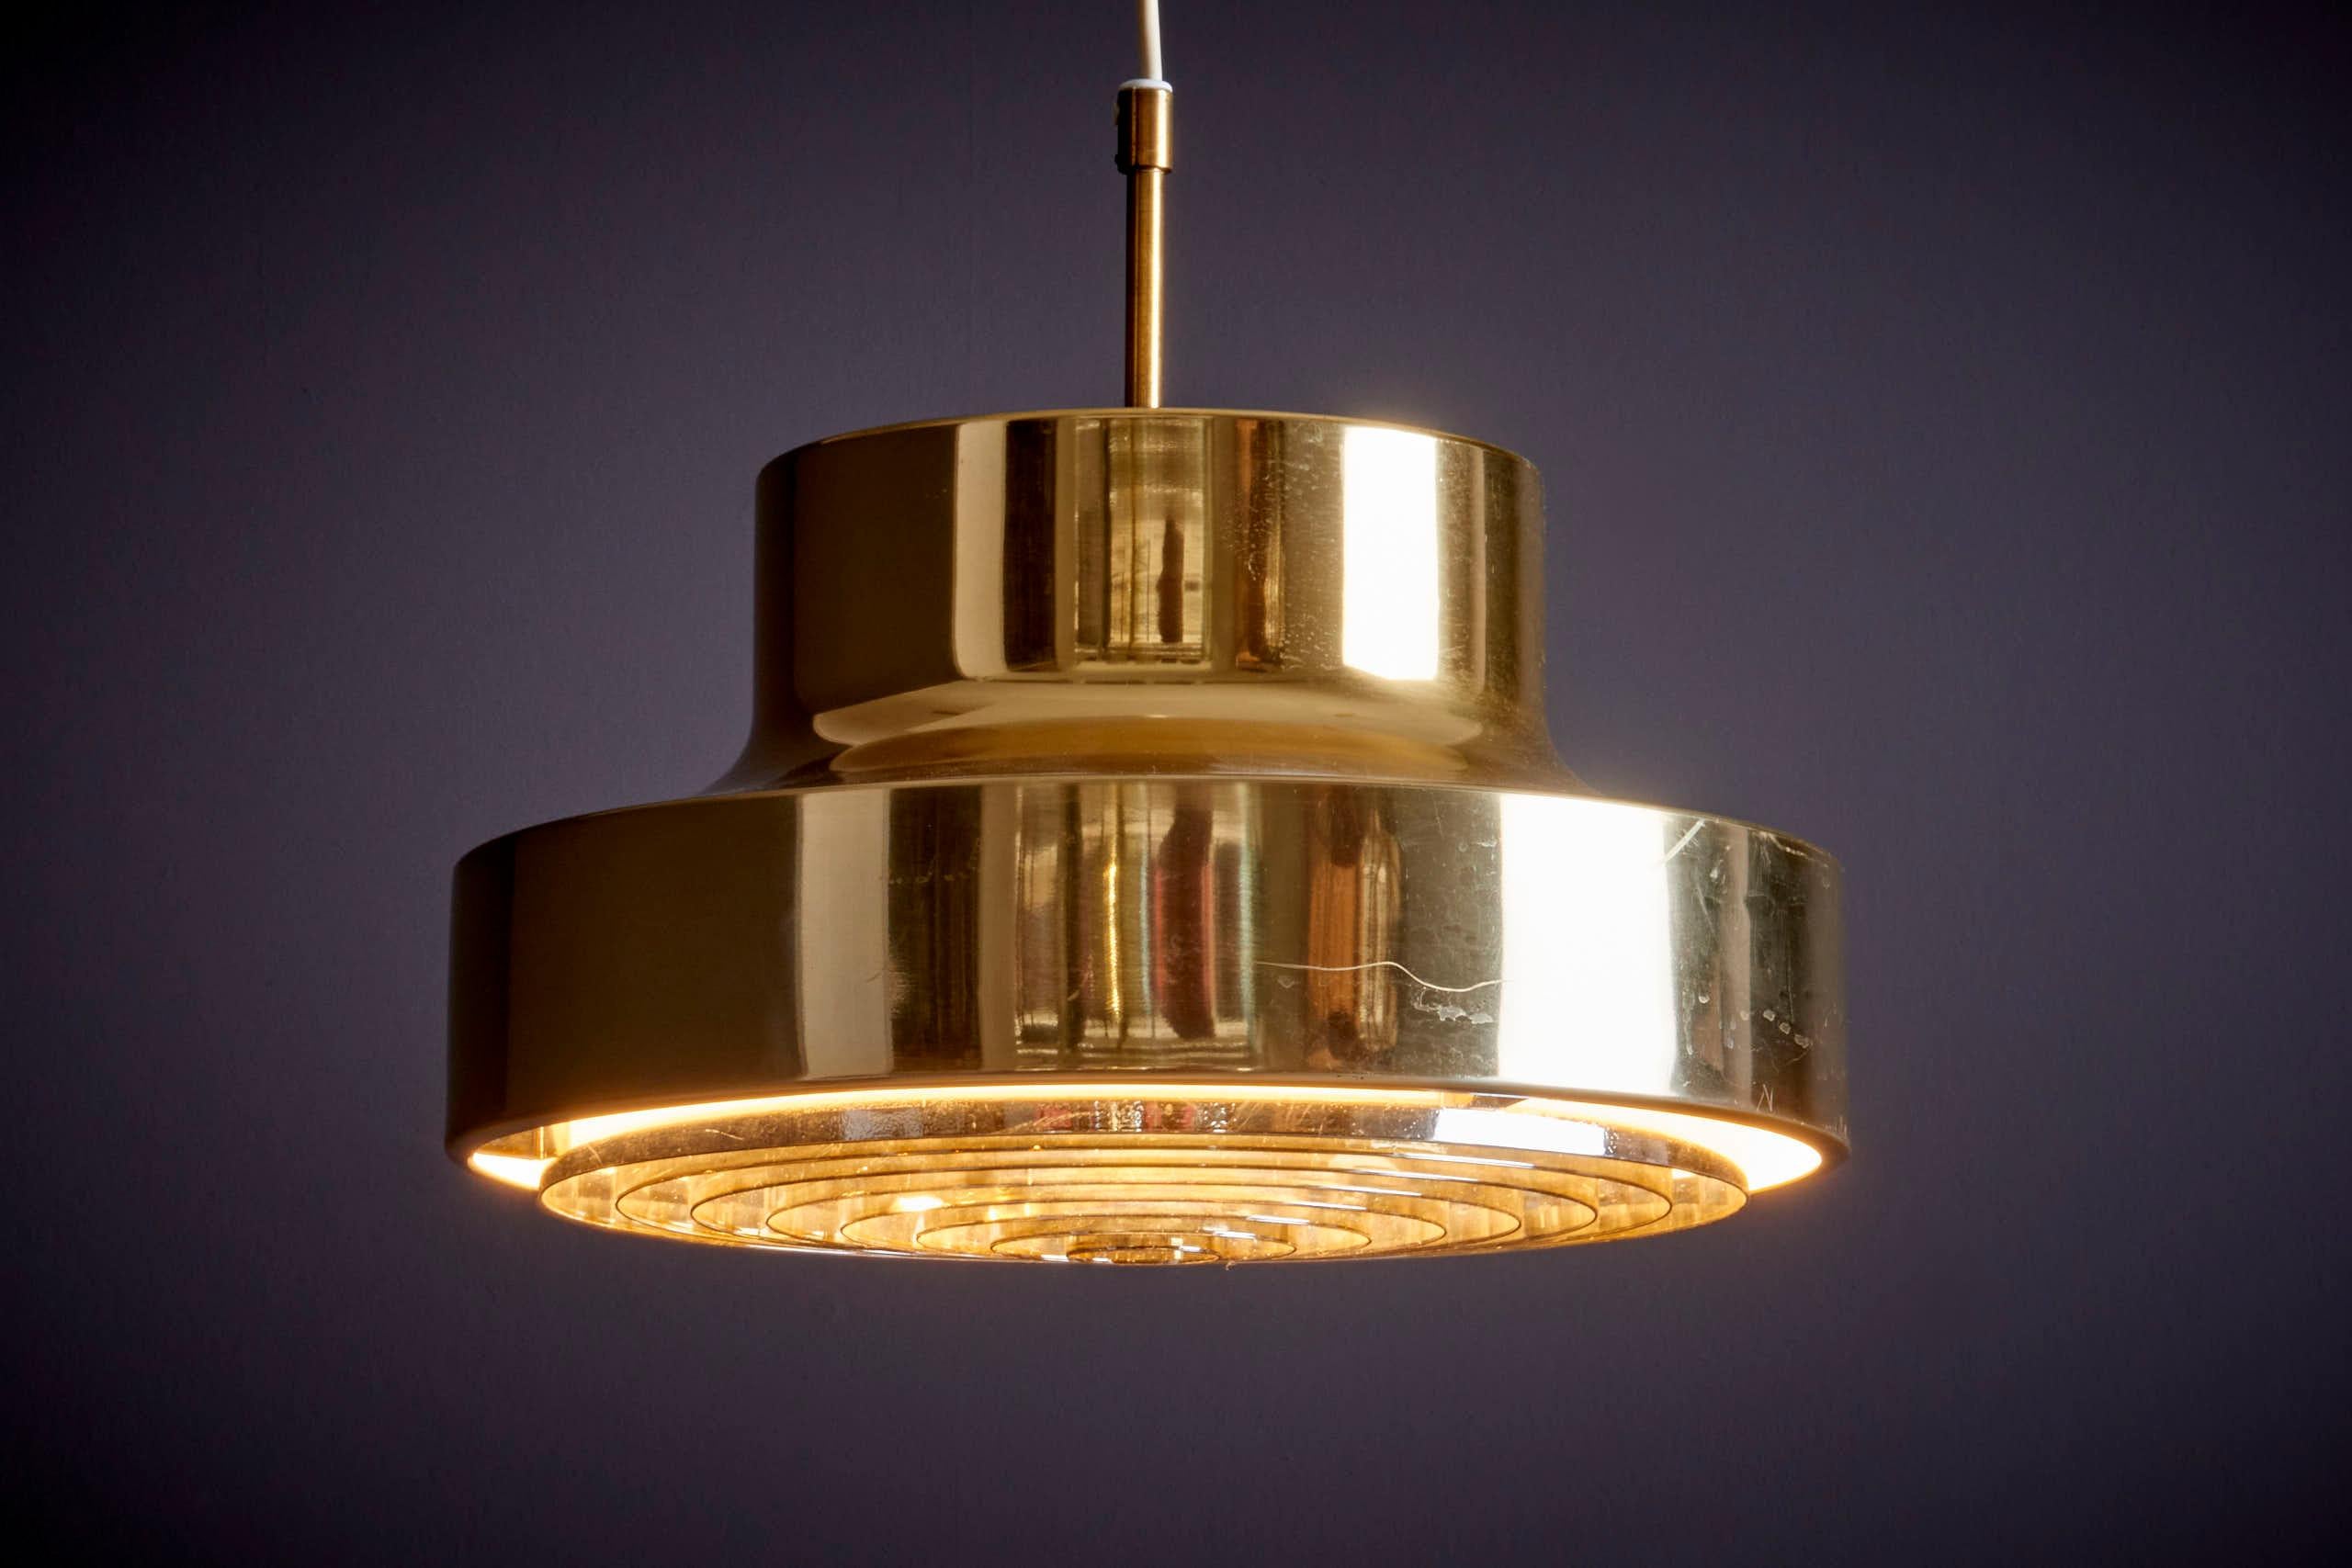 Falkenbergs Belysning Pendant Lamp, Sweden - 1960s in good original condition. Please note: Lamp should be fitted professionally in accordance to local requirements.